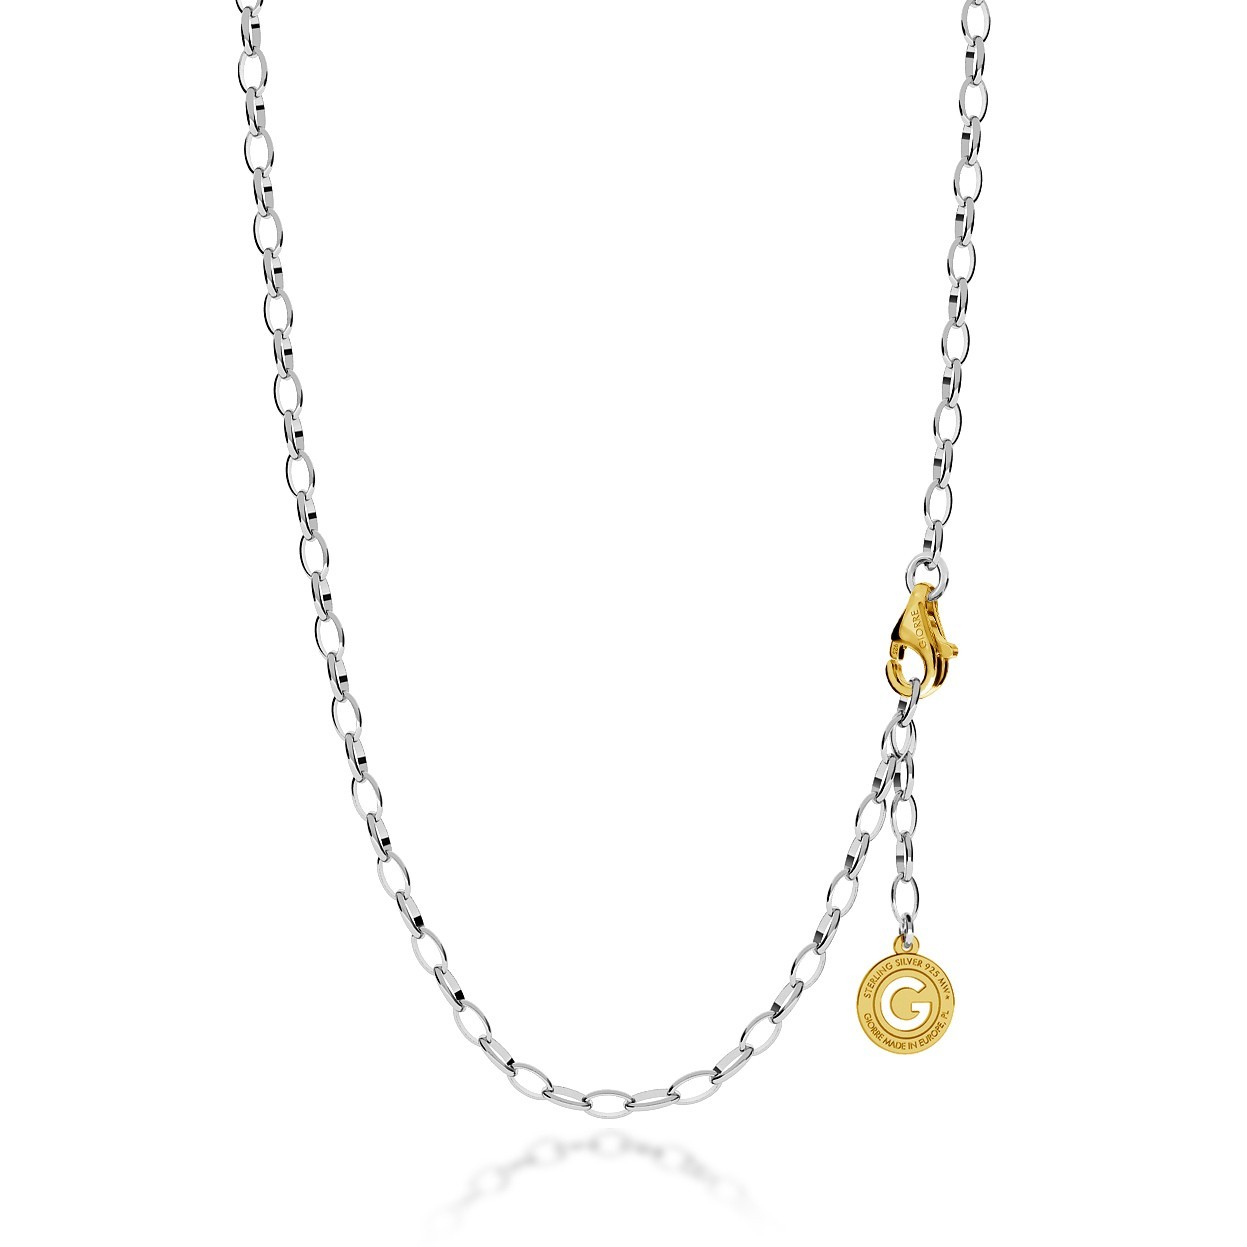 STERLING SILVER NECKLACE 55-65 CM LIGHT RHODIUM, YELLOW GOLD CLASP, LINK 6X4 MM